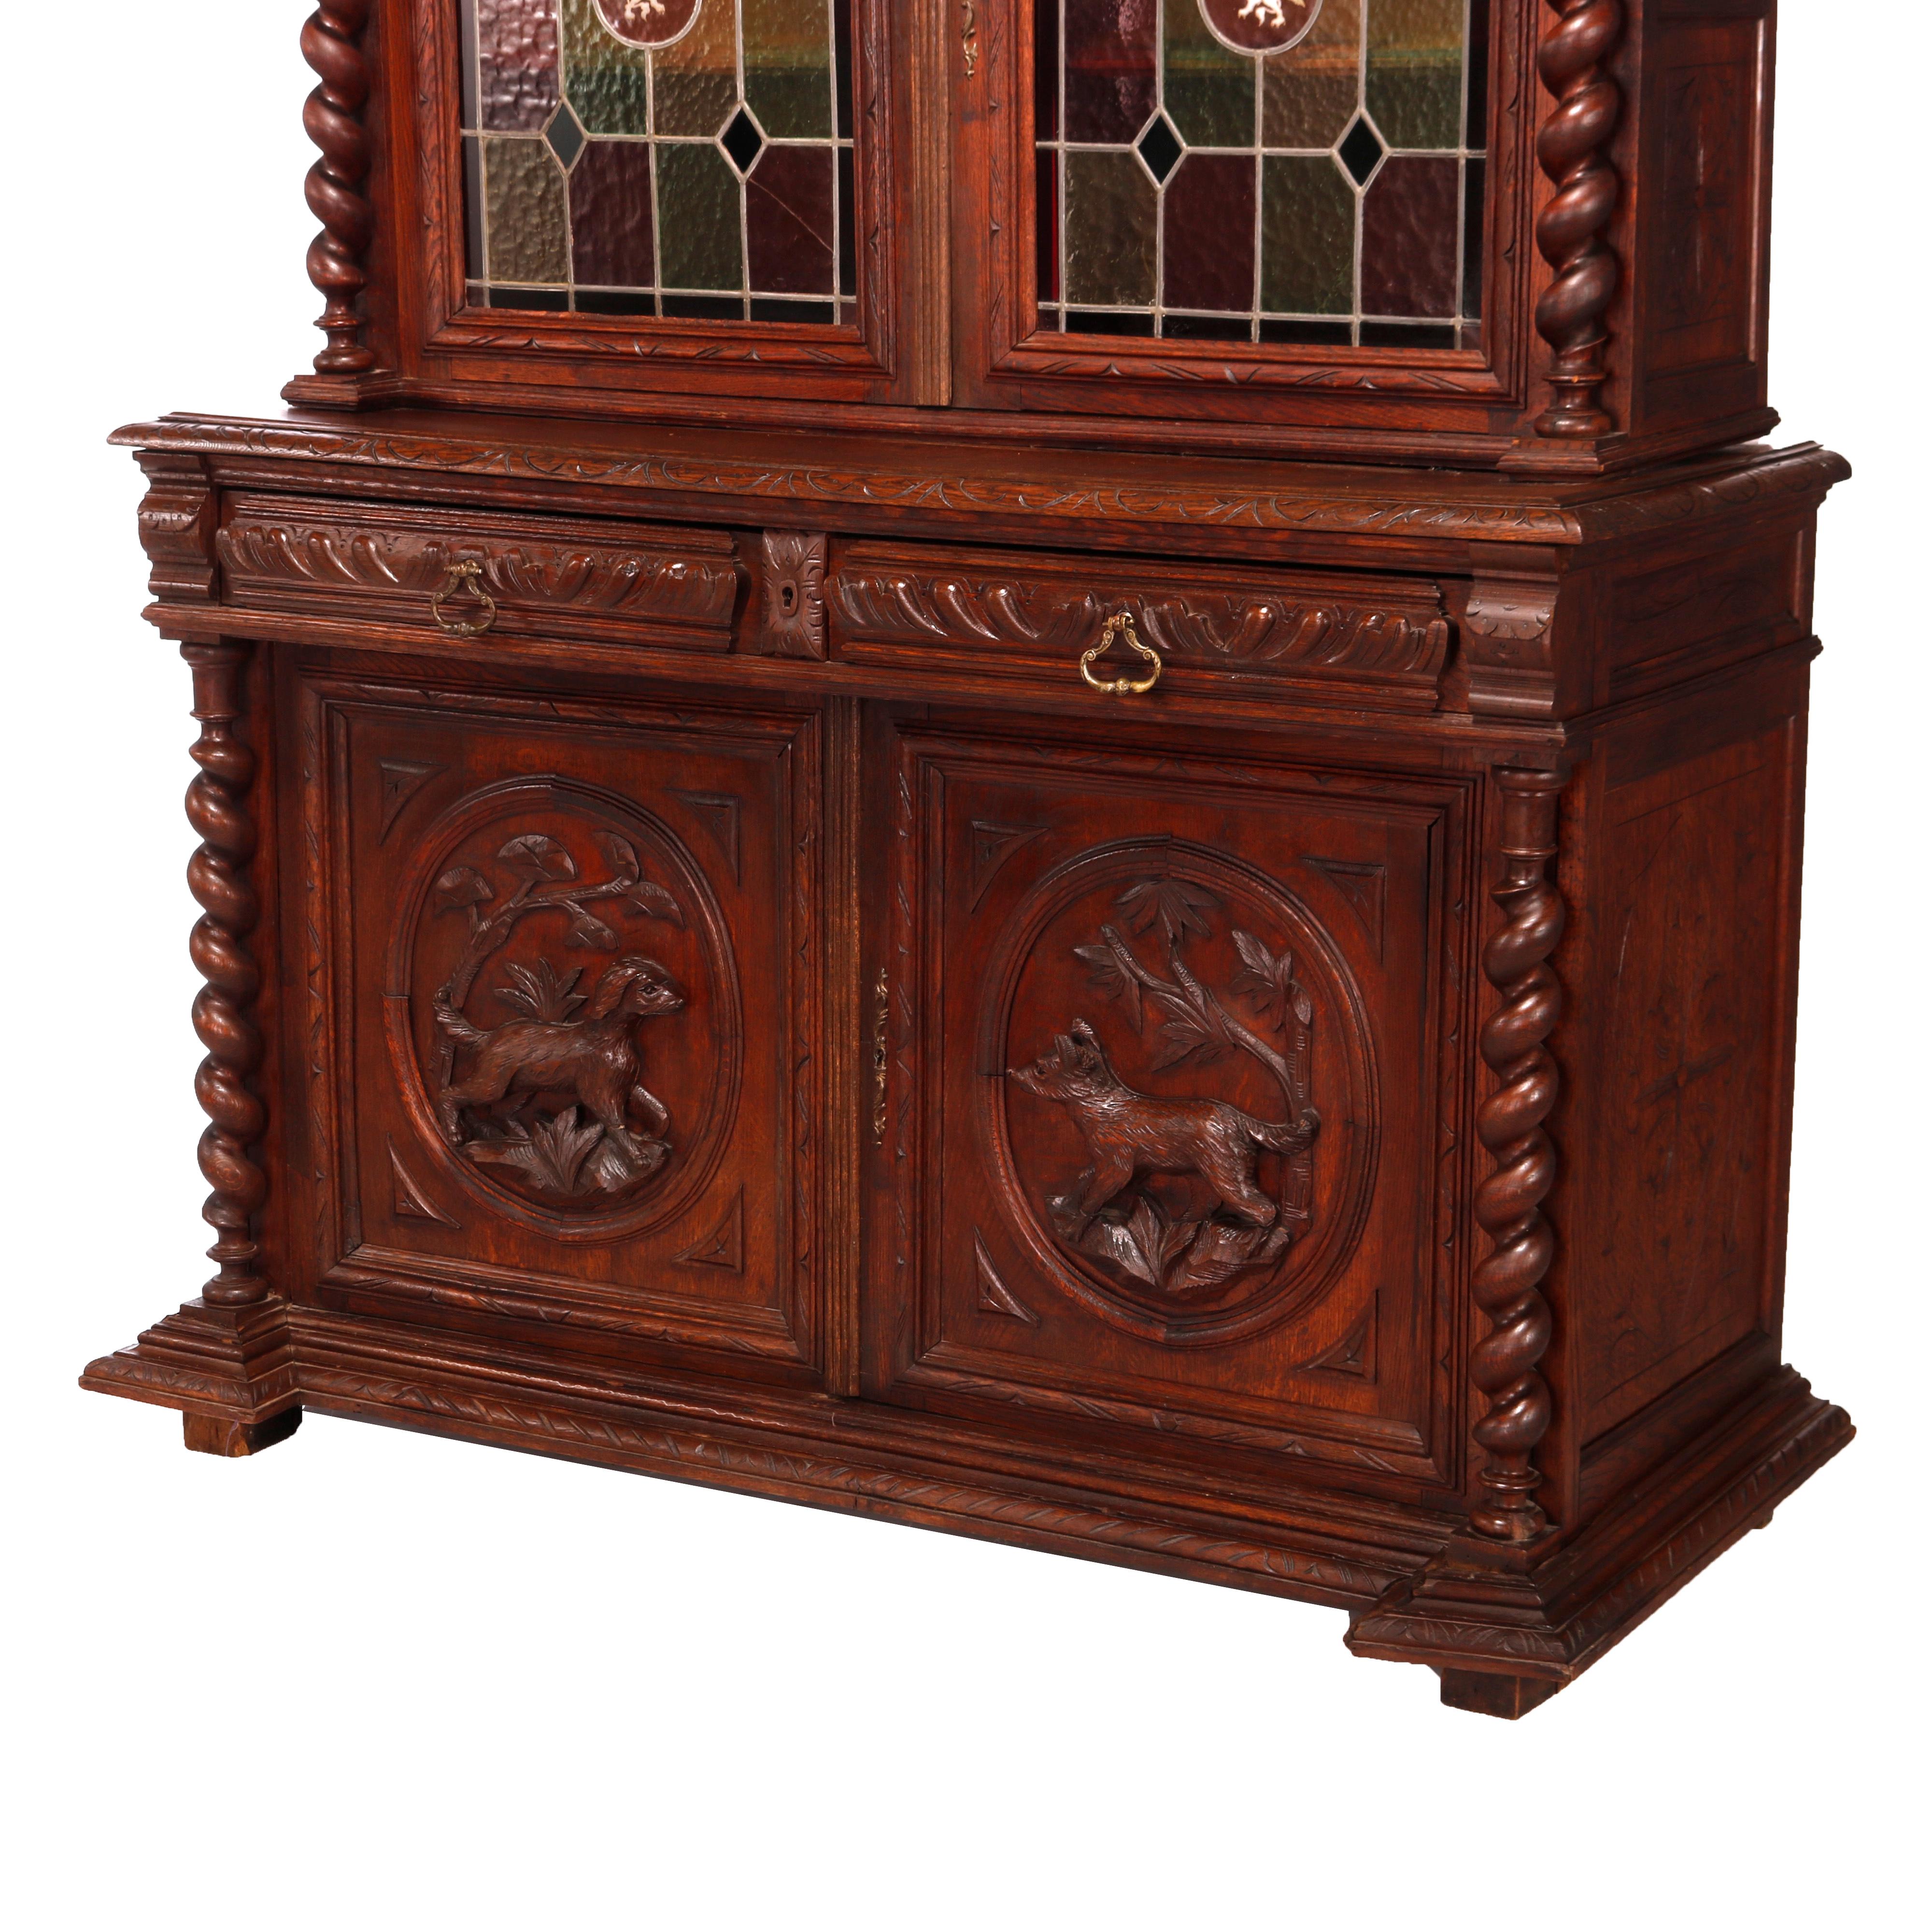 19th Century Antique German Figural Carved Oak & Leaded Glass Court Cabinet circa 1890